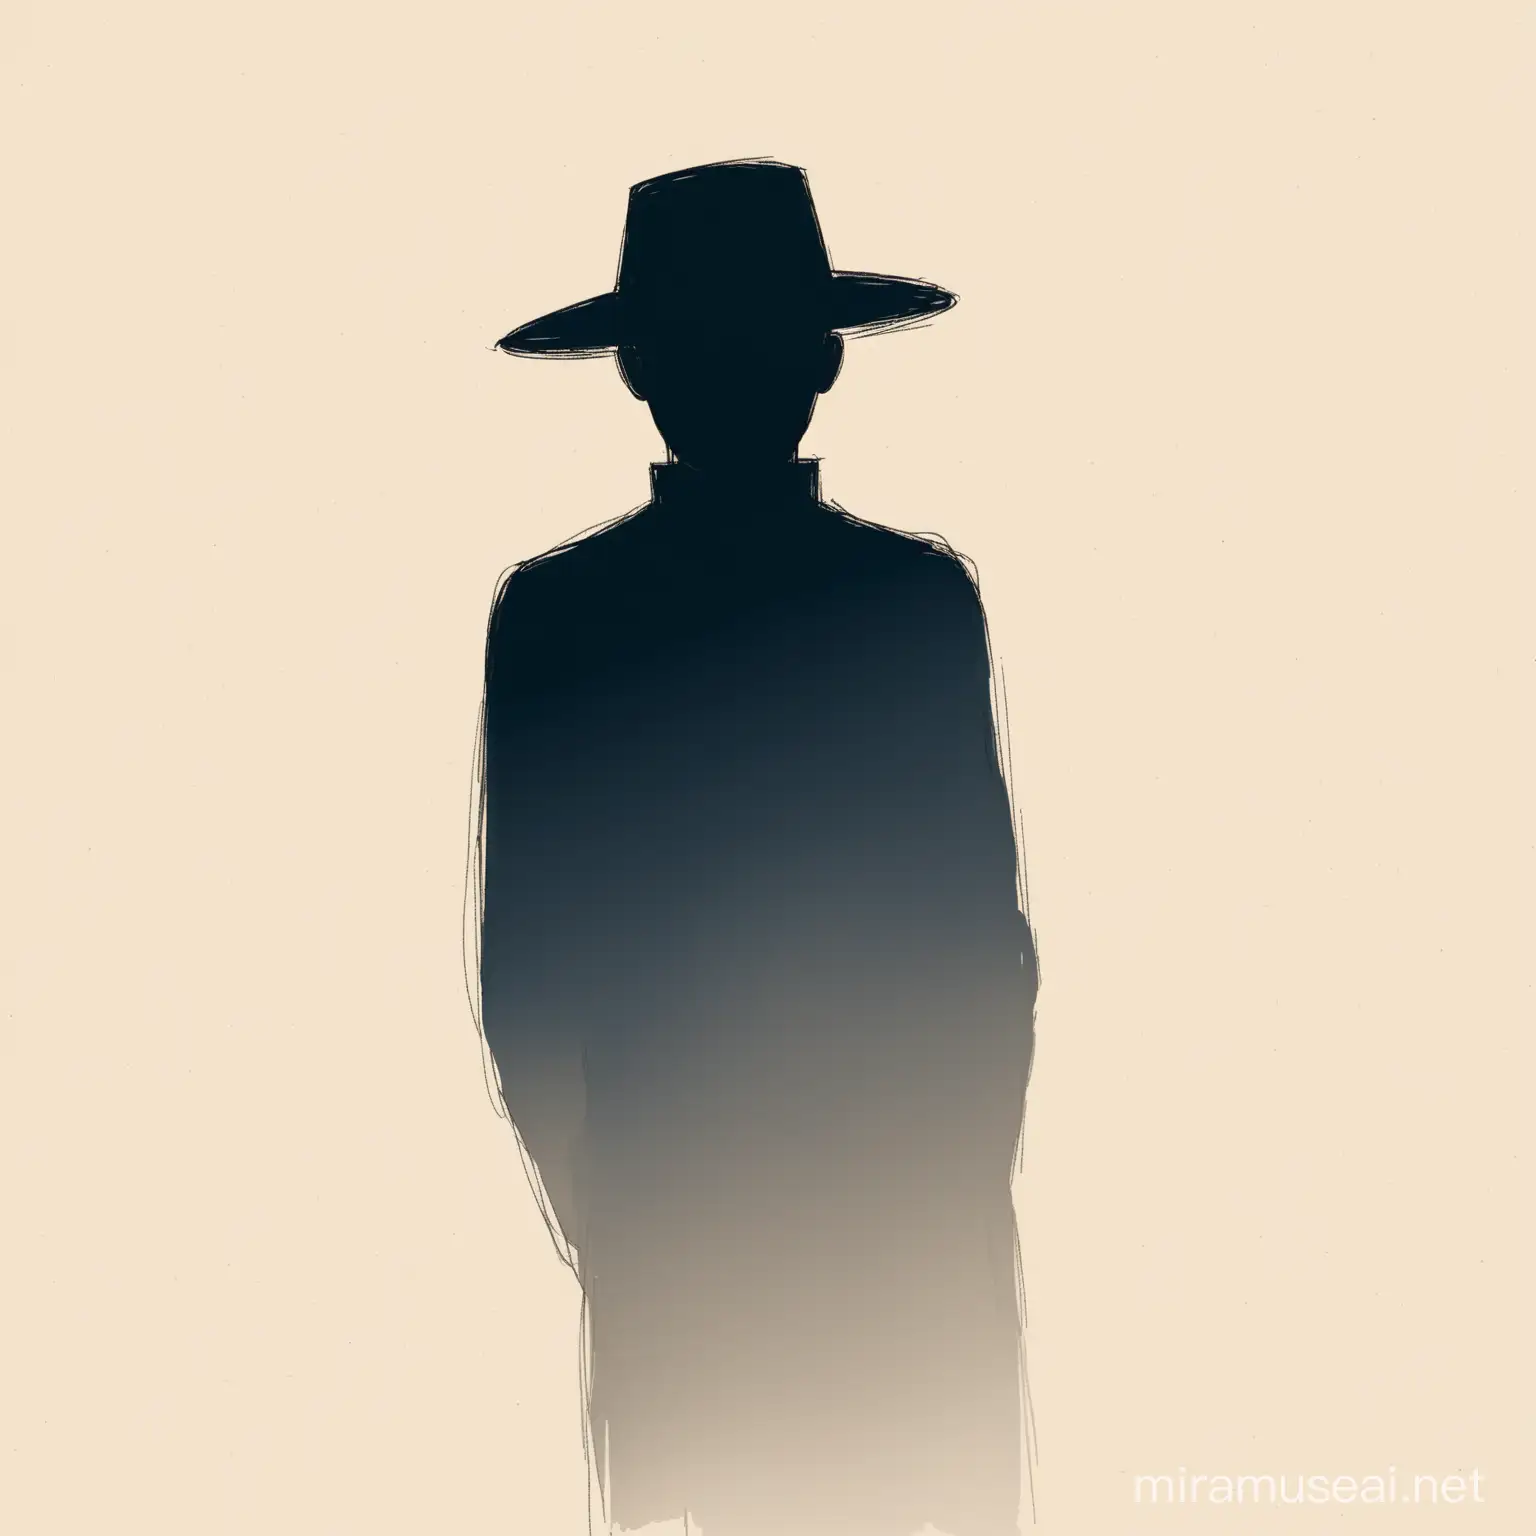 simplest sketch of mysterious person. He looks like a shadow.